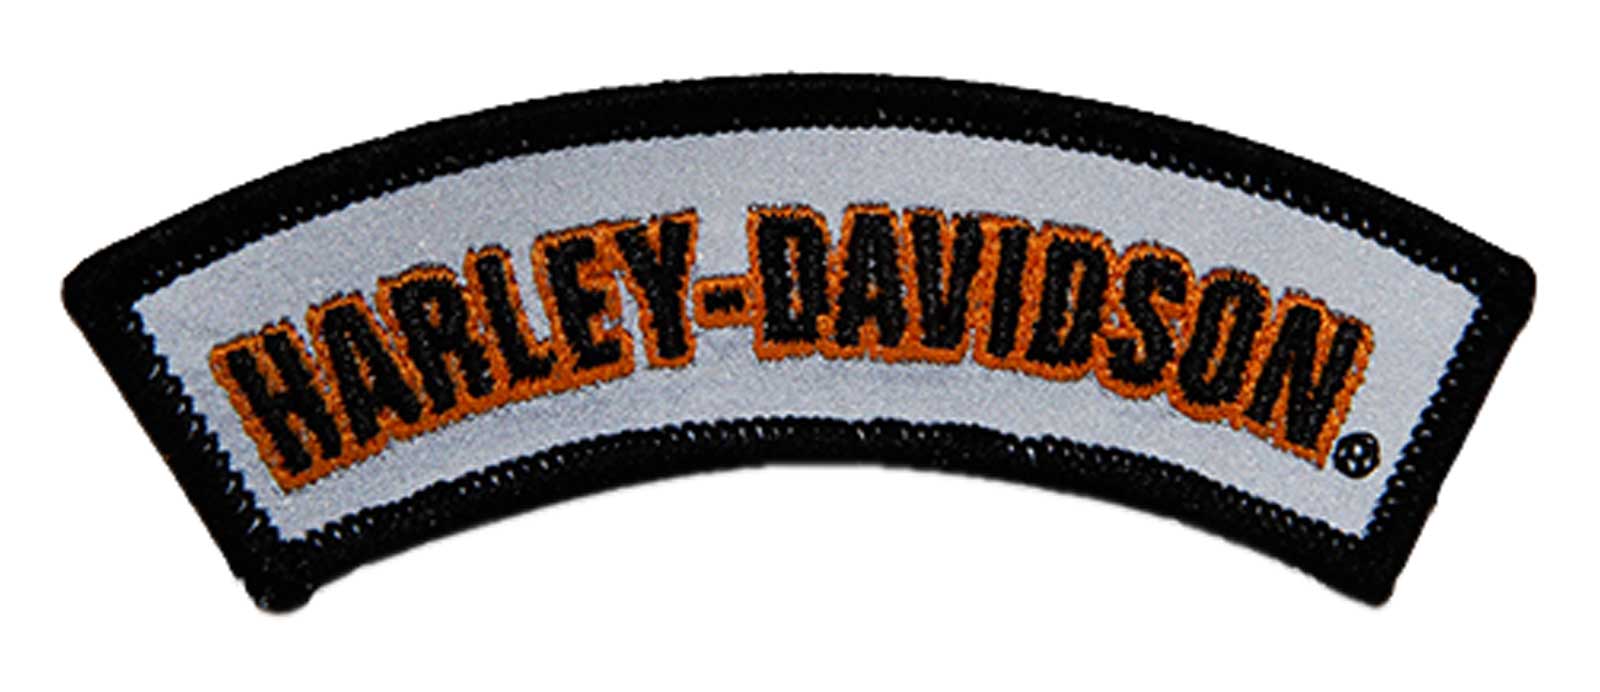 HARLEY DAVIDSON PATCHE LETTER EMBROIDERED PATCH FOR SEWING ON